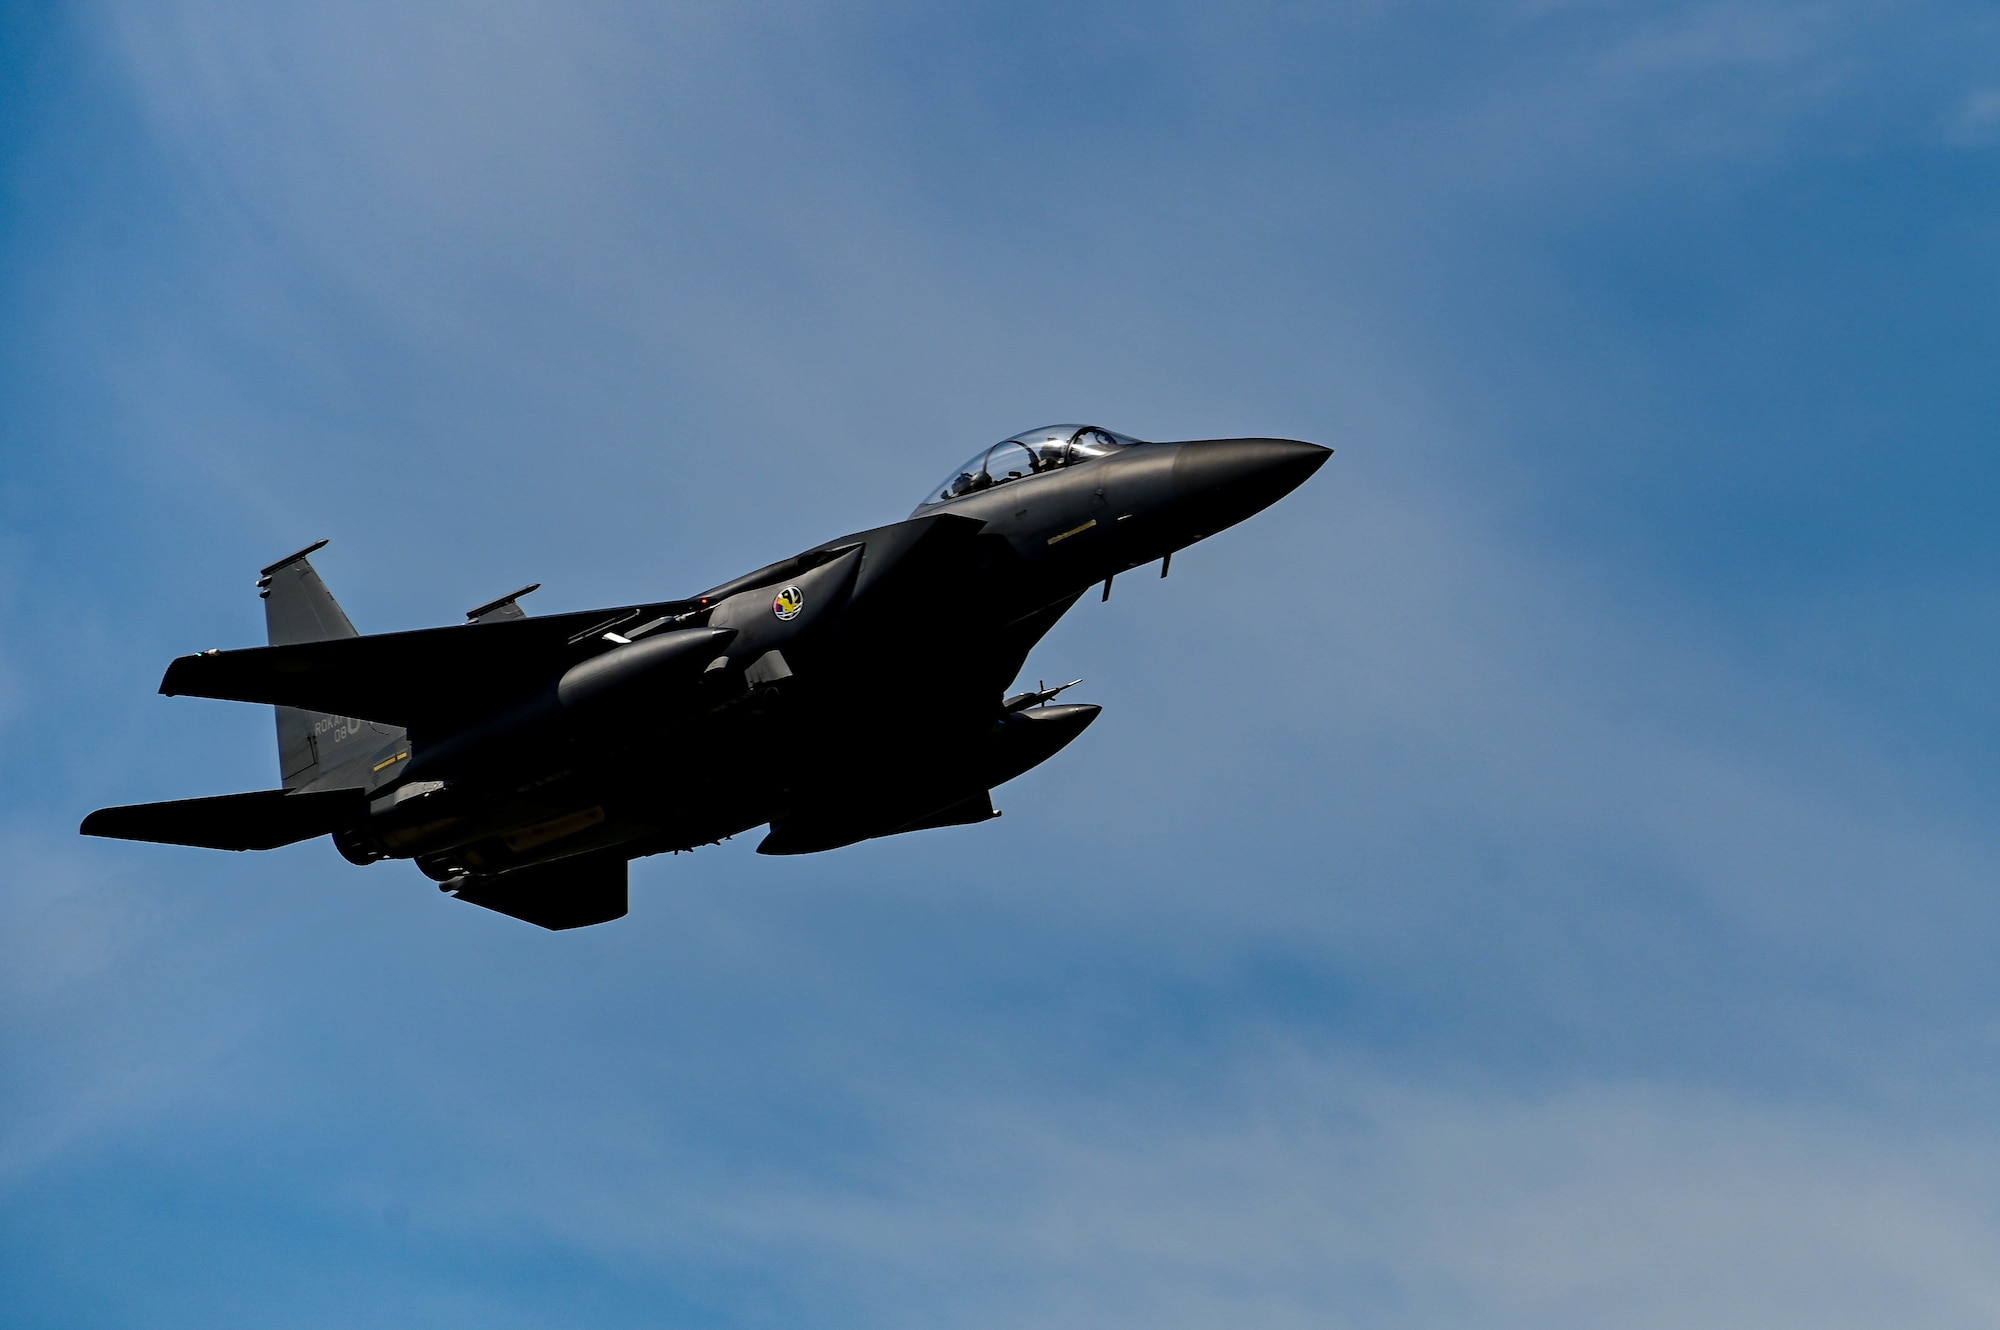 A Republic of Korea Air Force F-15K Slam Eagle assigned to the 110th Fighter Squadron soars through the sky during routine training at Kunsan Air Base, Republic of Korea, Sept. 22, 2022. During the training, ROKAF and U.S. pilots increased force interoperability by practicing air-to-air and air-to-ground tactics. (U.S. Air Force Photo by Senior Airman Shannon Braaten)